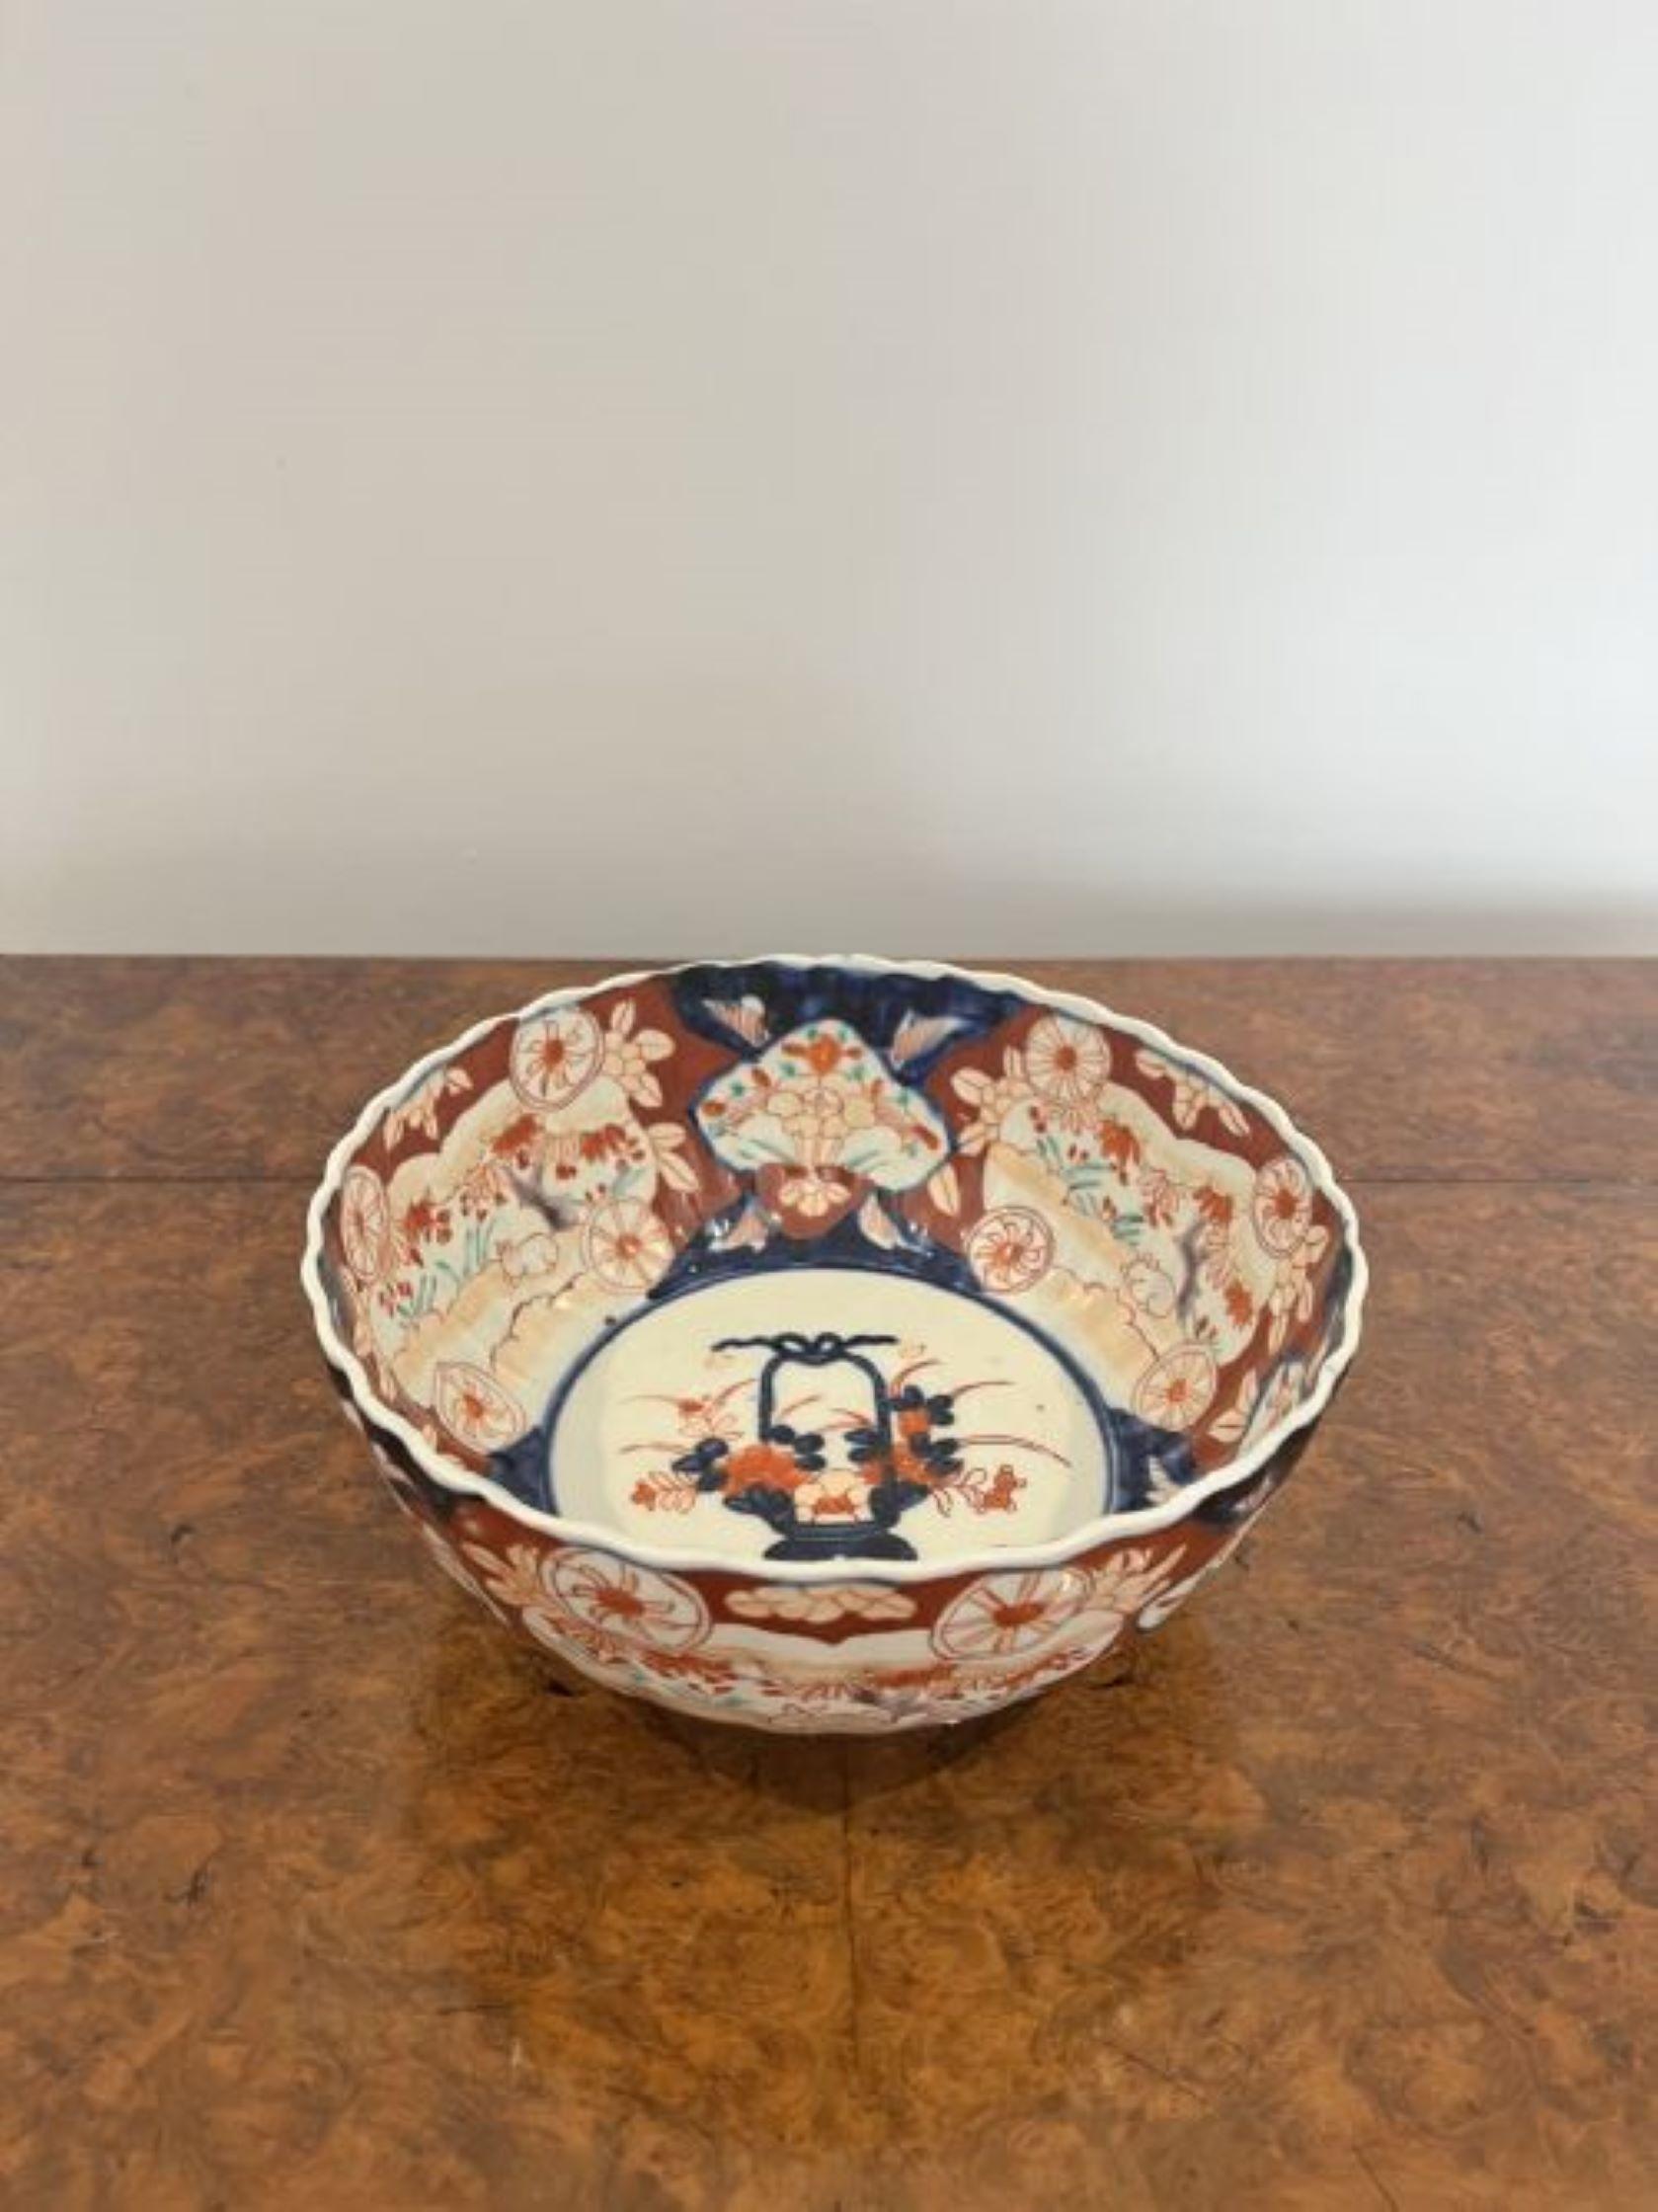 Lovely antique Japanese imari bowl with a scallop shaped edge For Sale 2